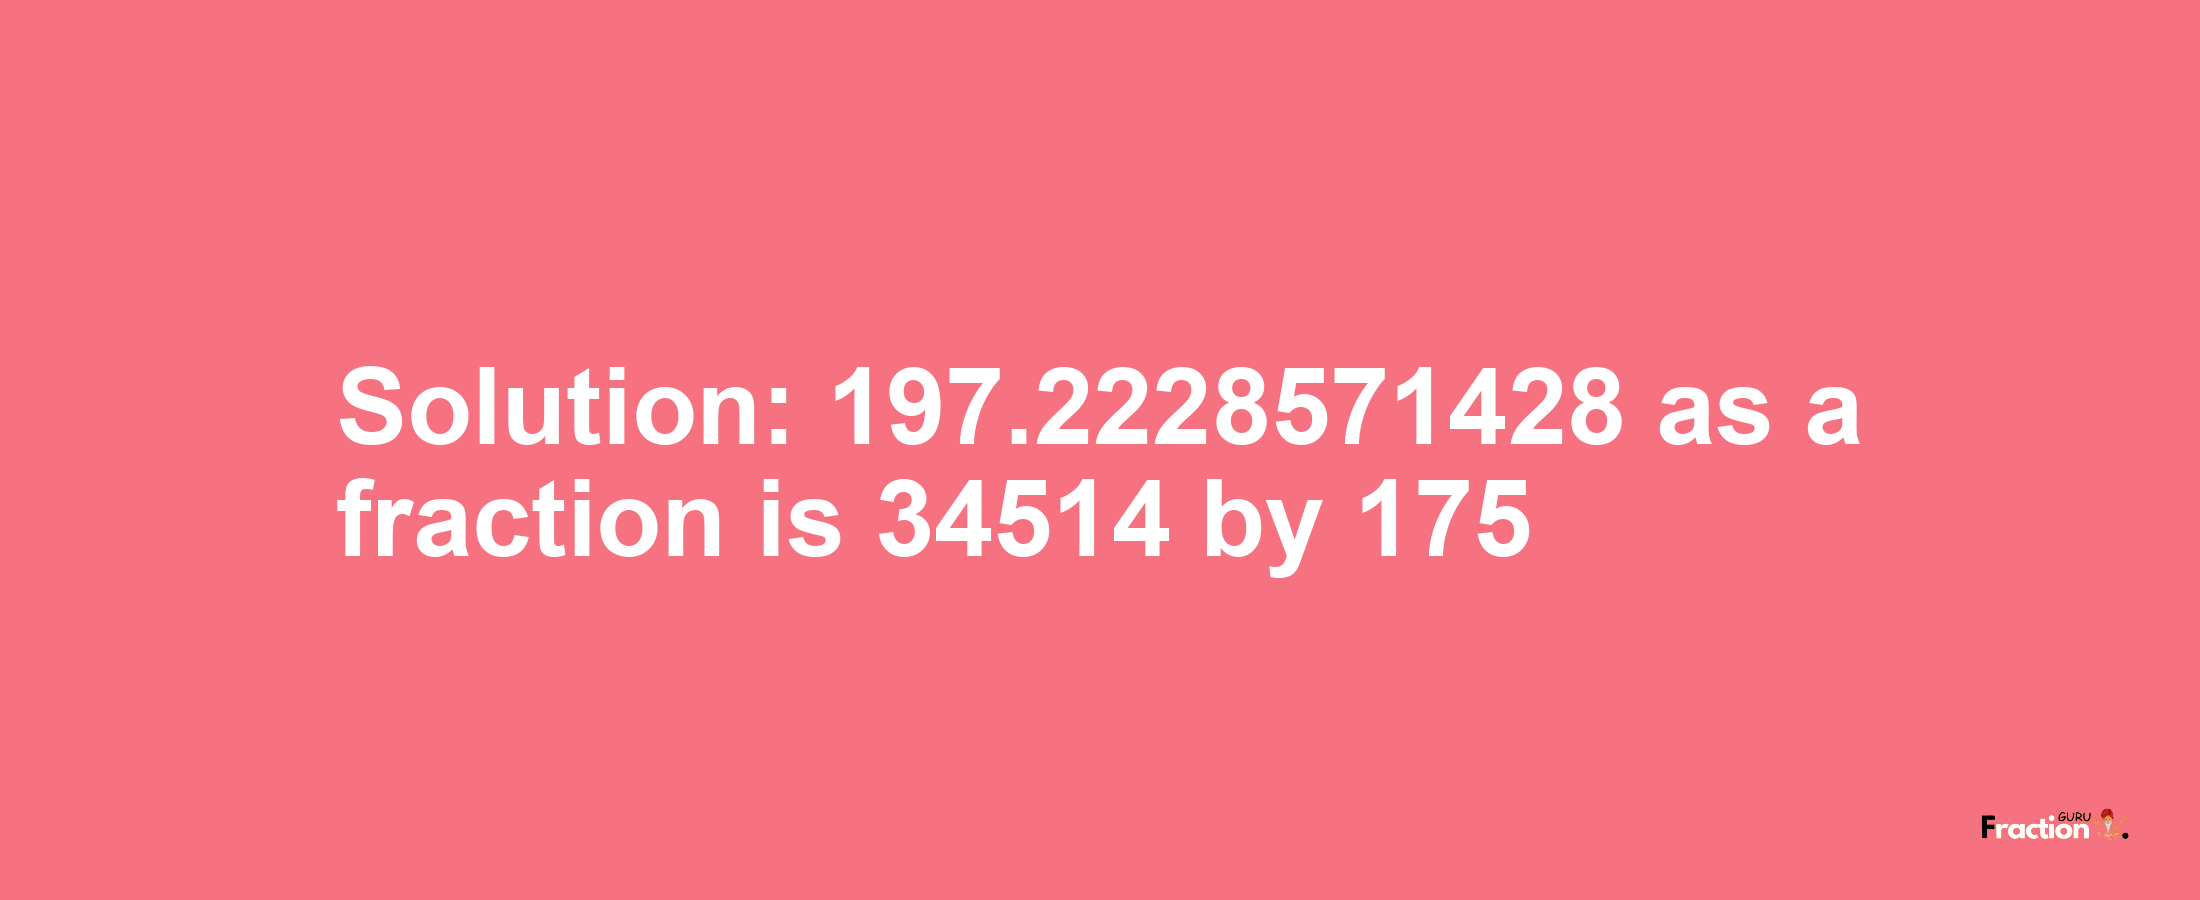 Solution:197.2228571428 as a fraction is 34514/175